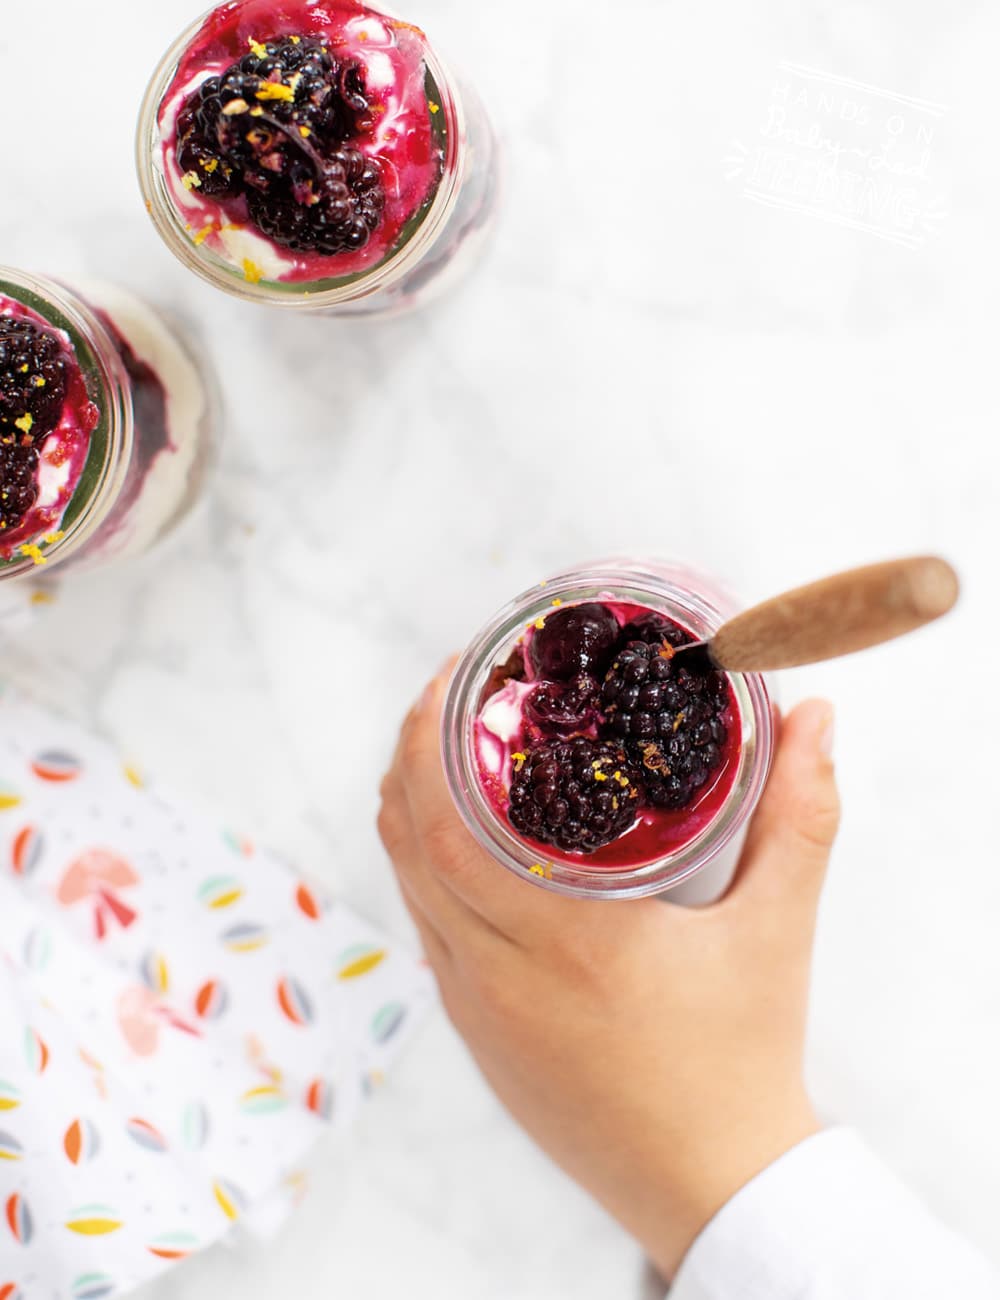 Blackberry and Blueberry Cheesecake Jar Recipe Images7